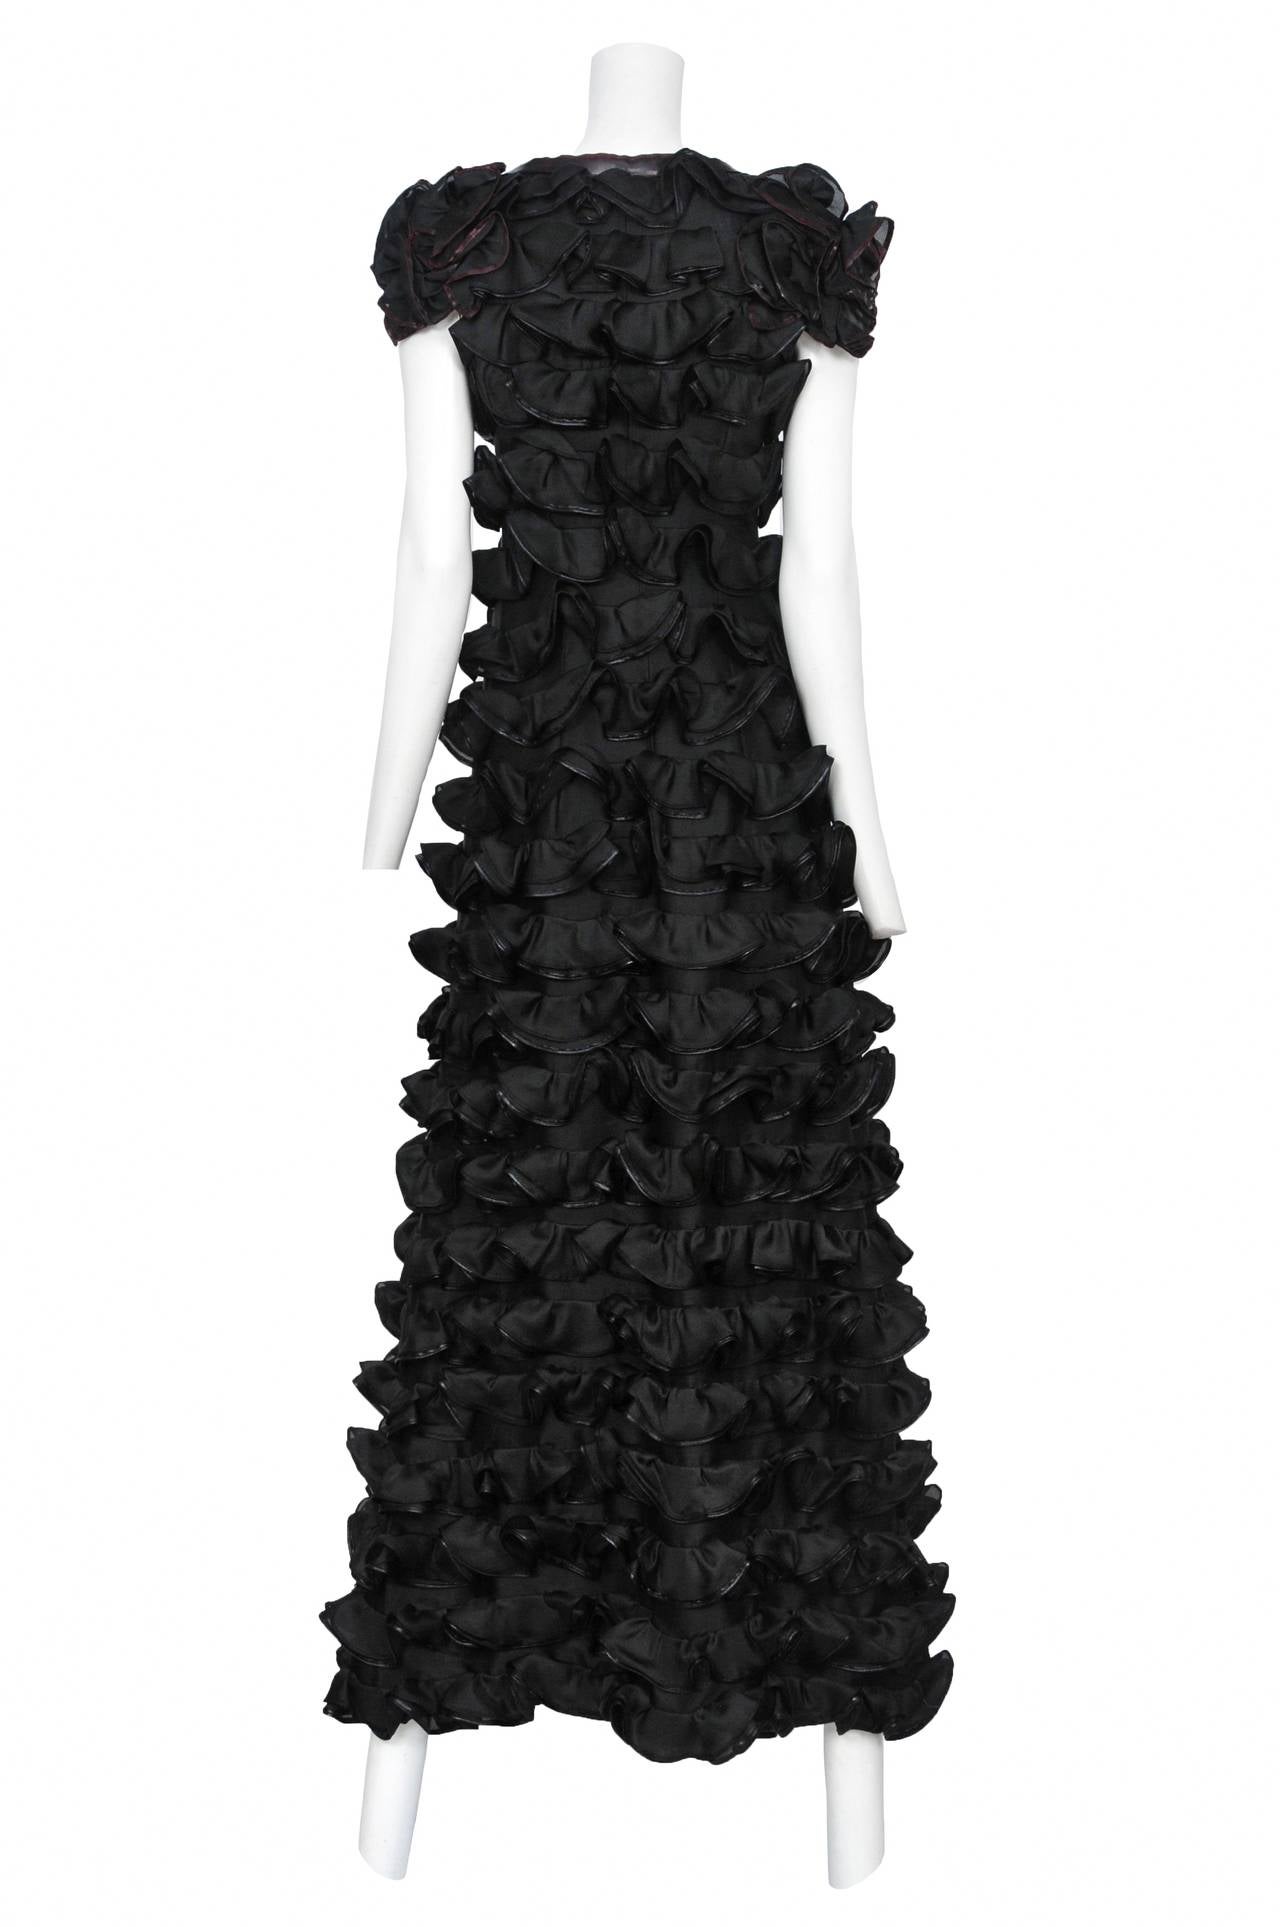 Courreges black organza maxi dress with cap sleeve. Featuring a v-neckline, tiered ruffles throughout and bows at chest and waist.